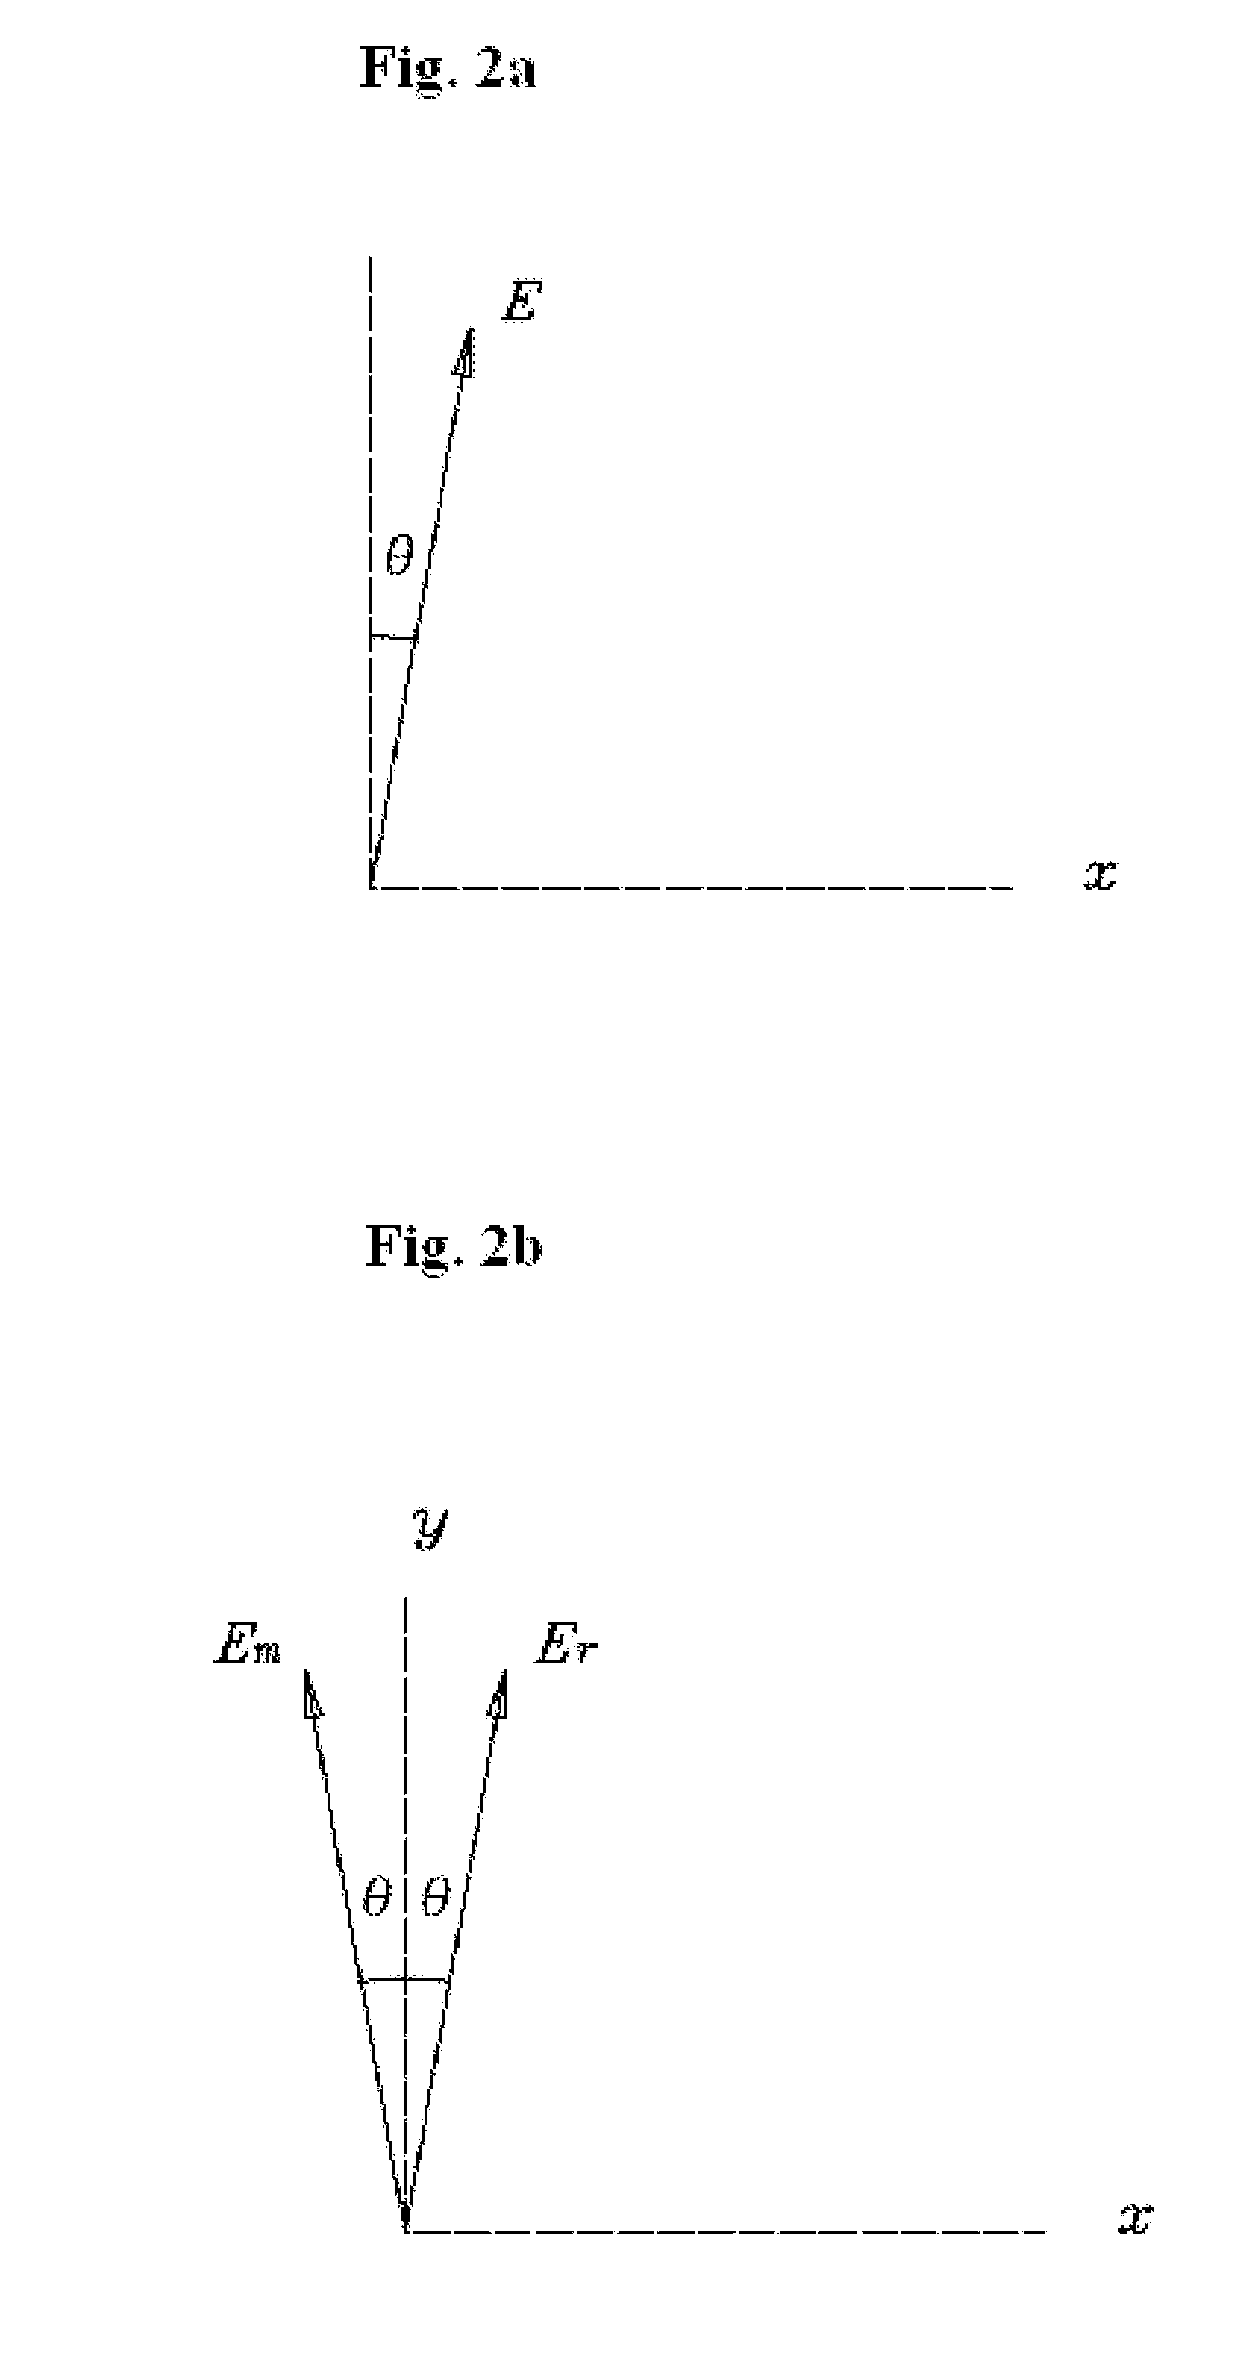 Heterodyne polarimeter with a background subtraction system